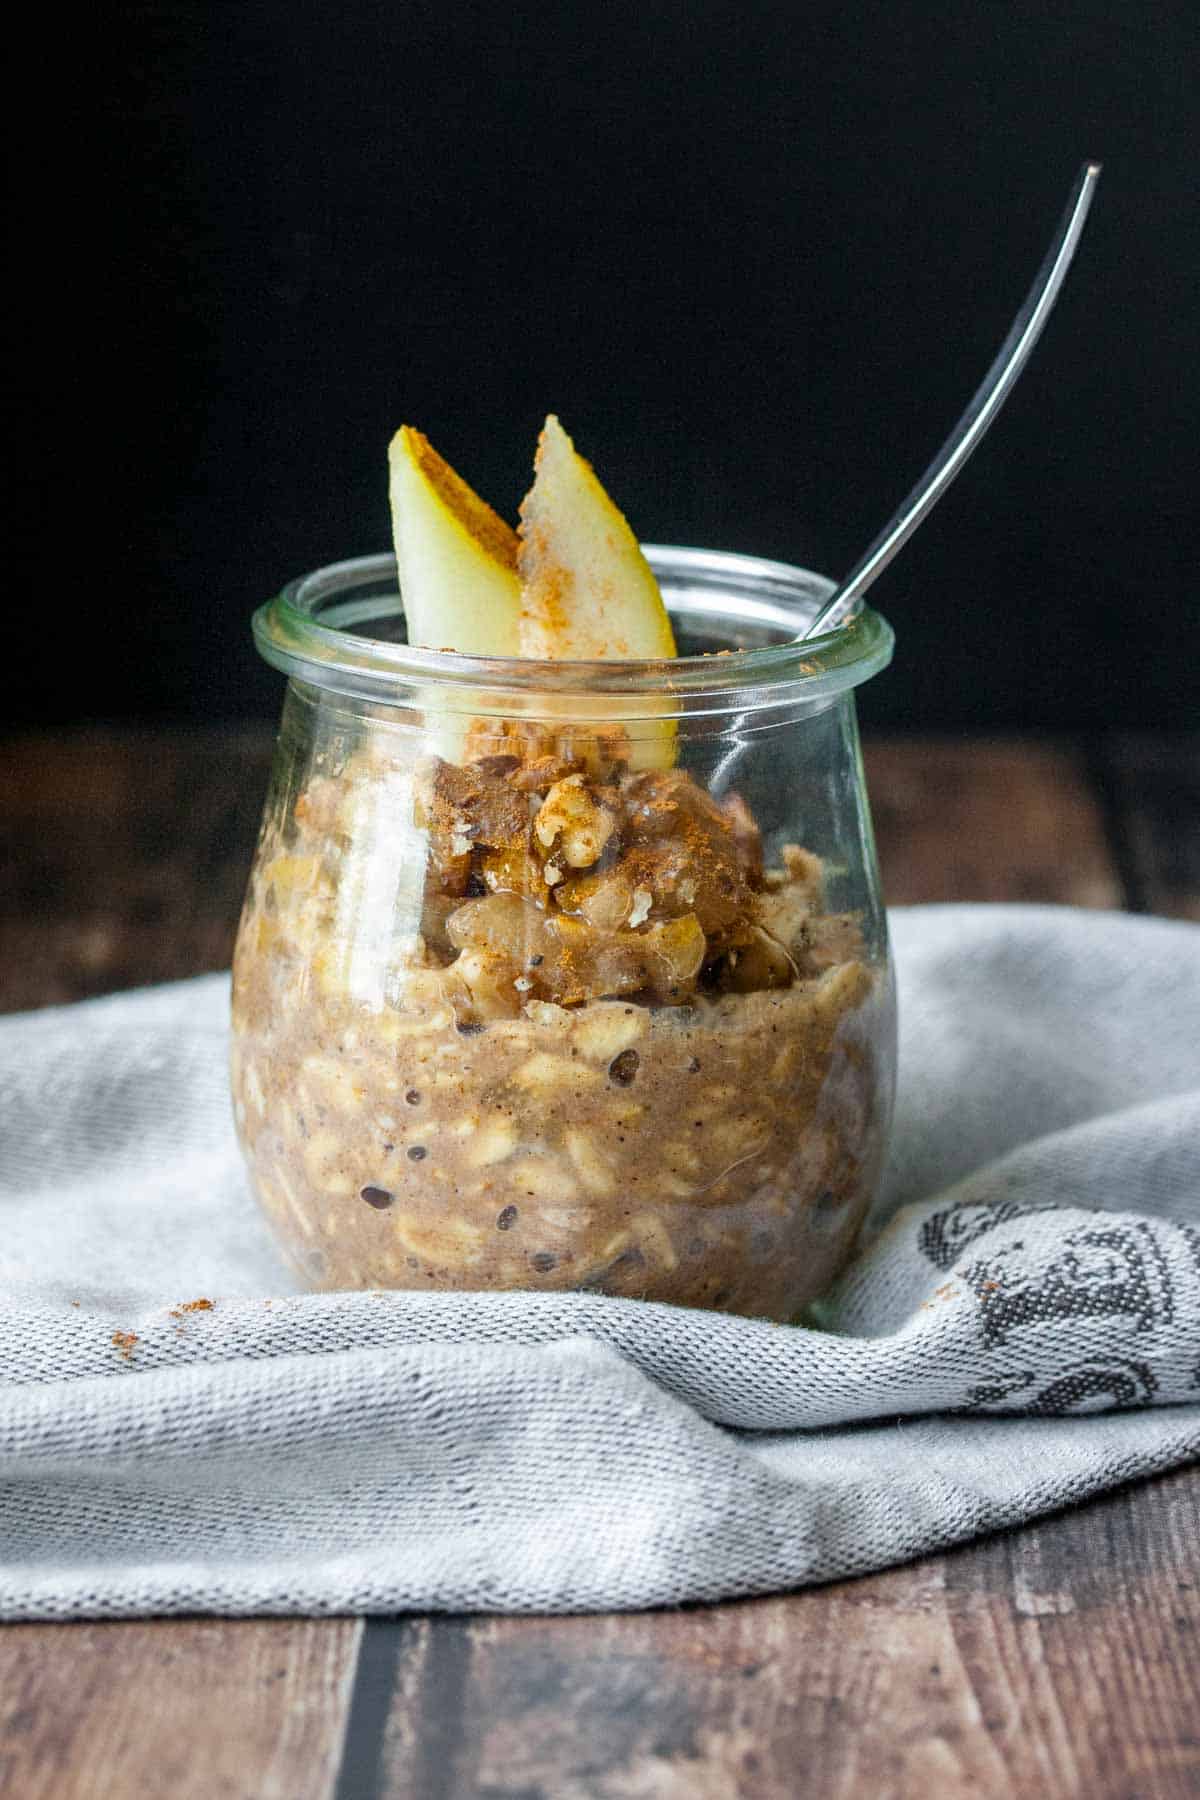 Pear flavored oats in a small glass jar with a metal spoon in it.